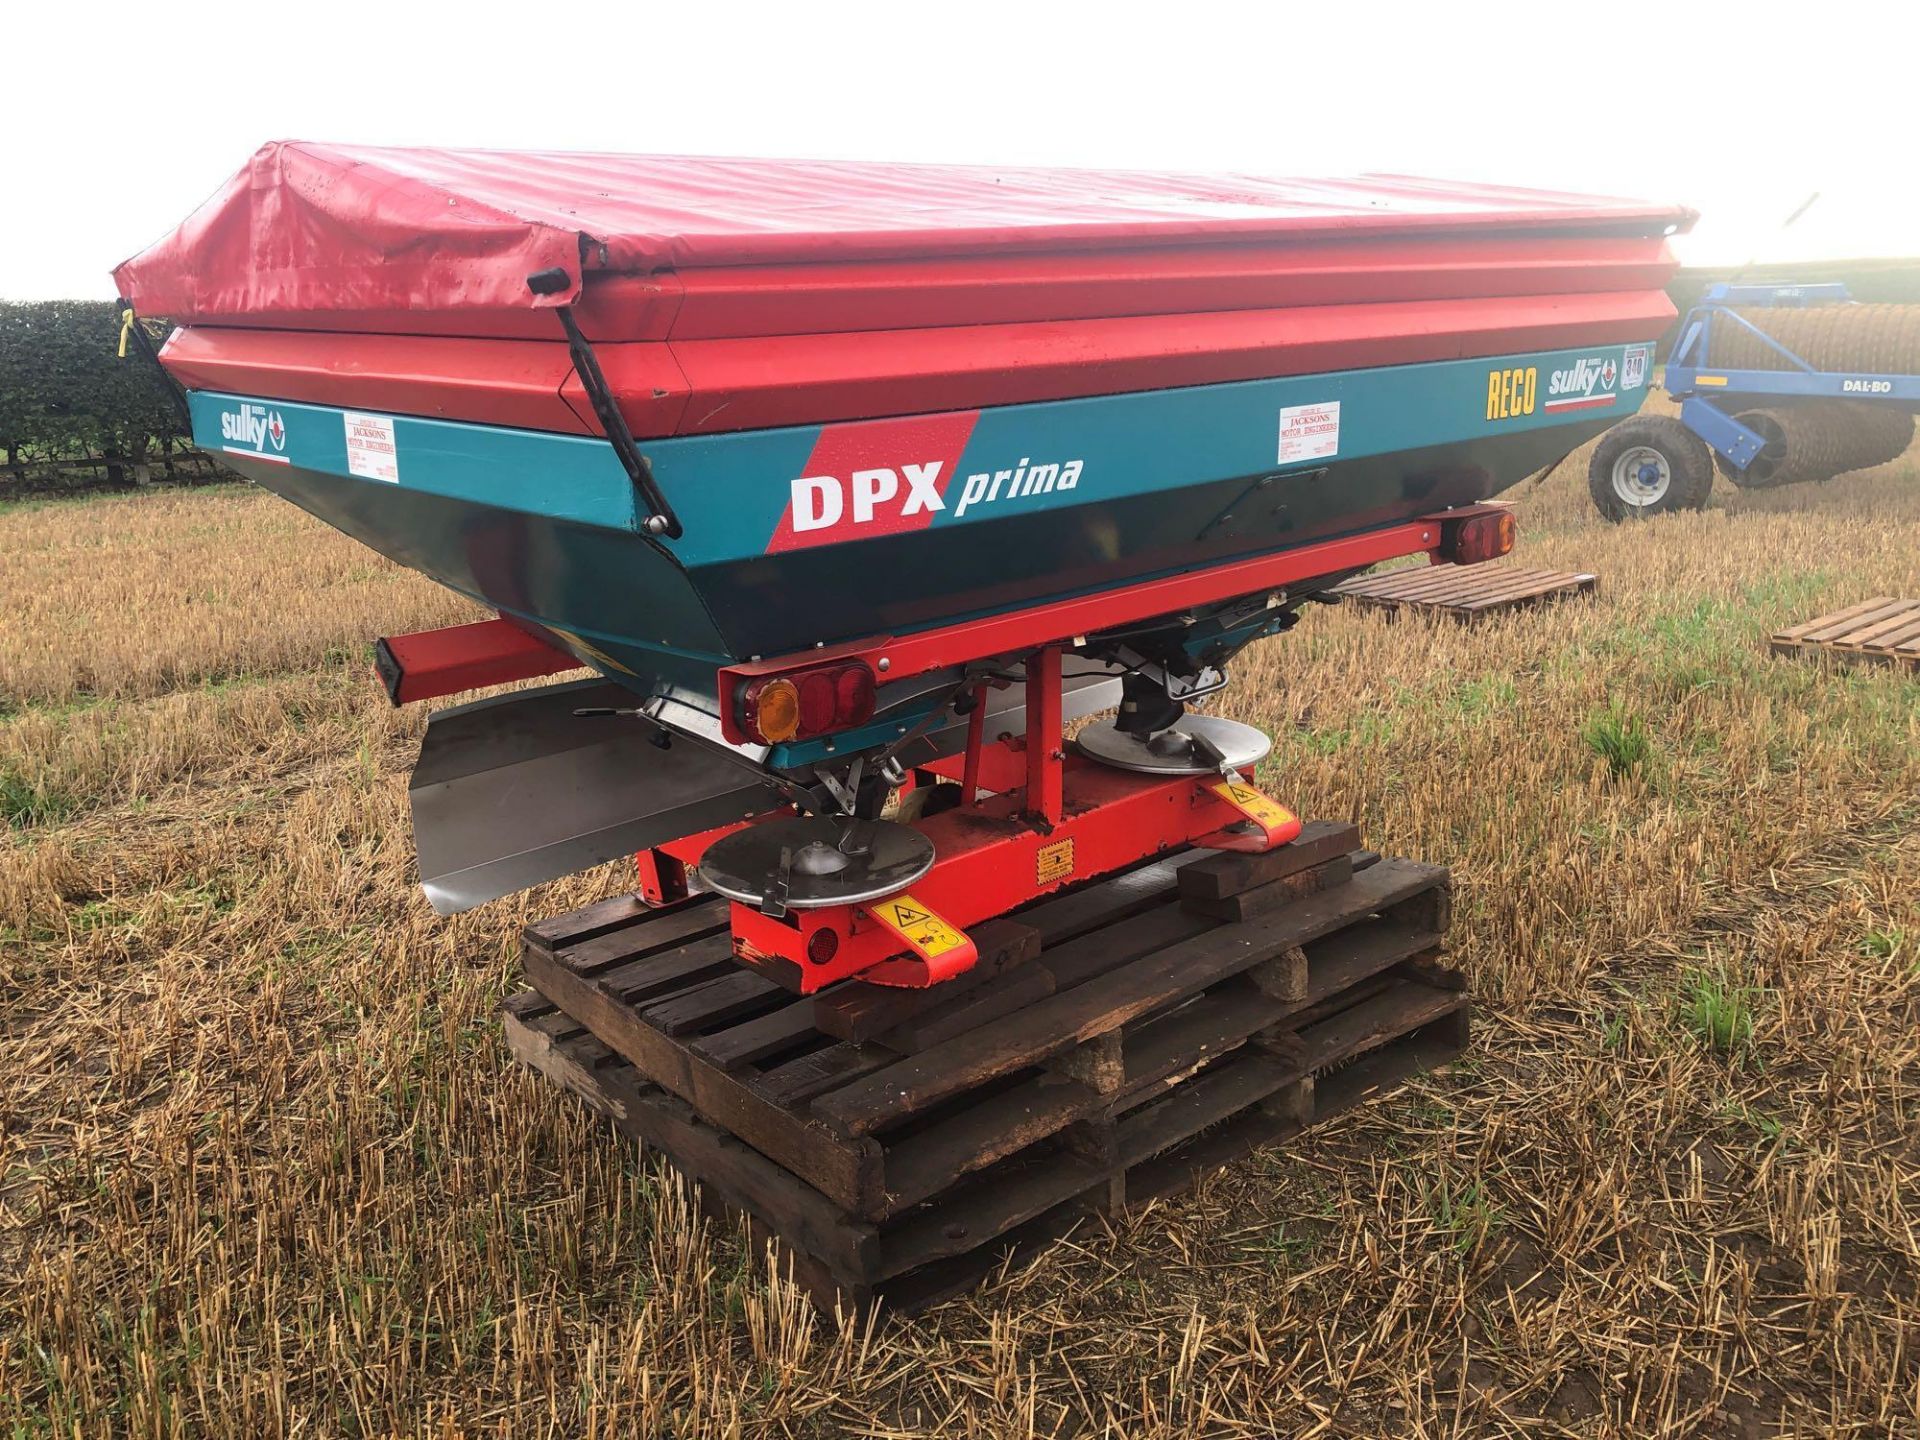 2004 Reco Sulky DPX Prima fertiliser spreader, vari width 12-24m, on farm from new. Serial No: DX011 - Image 2 of 6